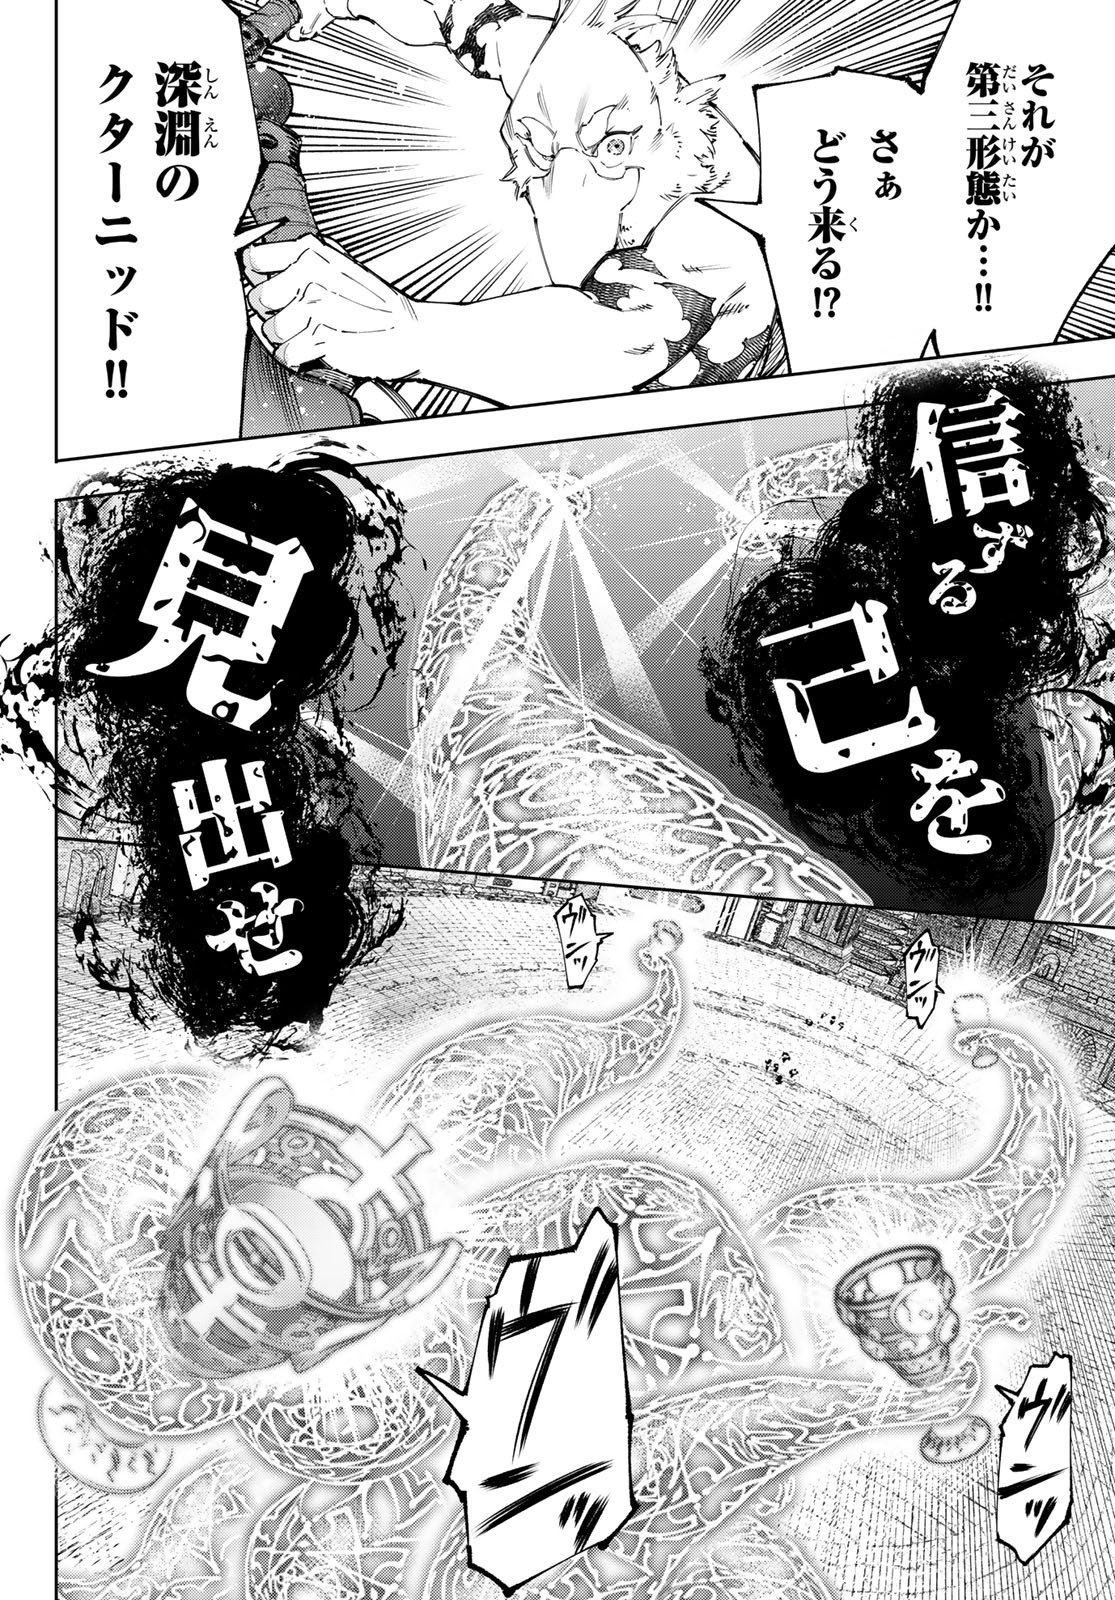 Weekly Shōnen Magazine - 週刊少年マガジン - Chapter 2024-32 - Page 84